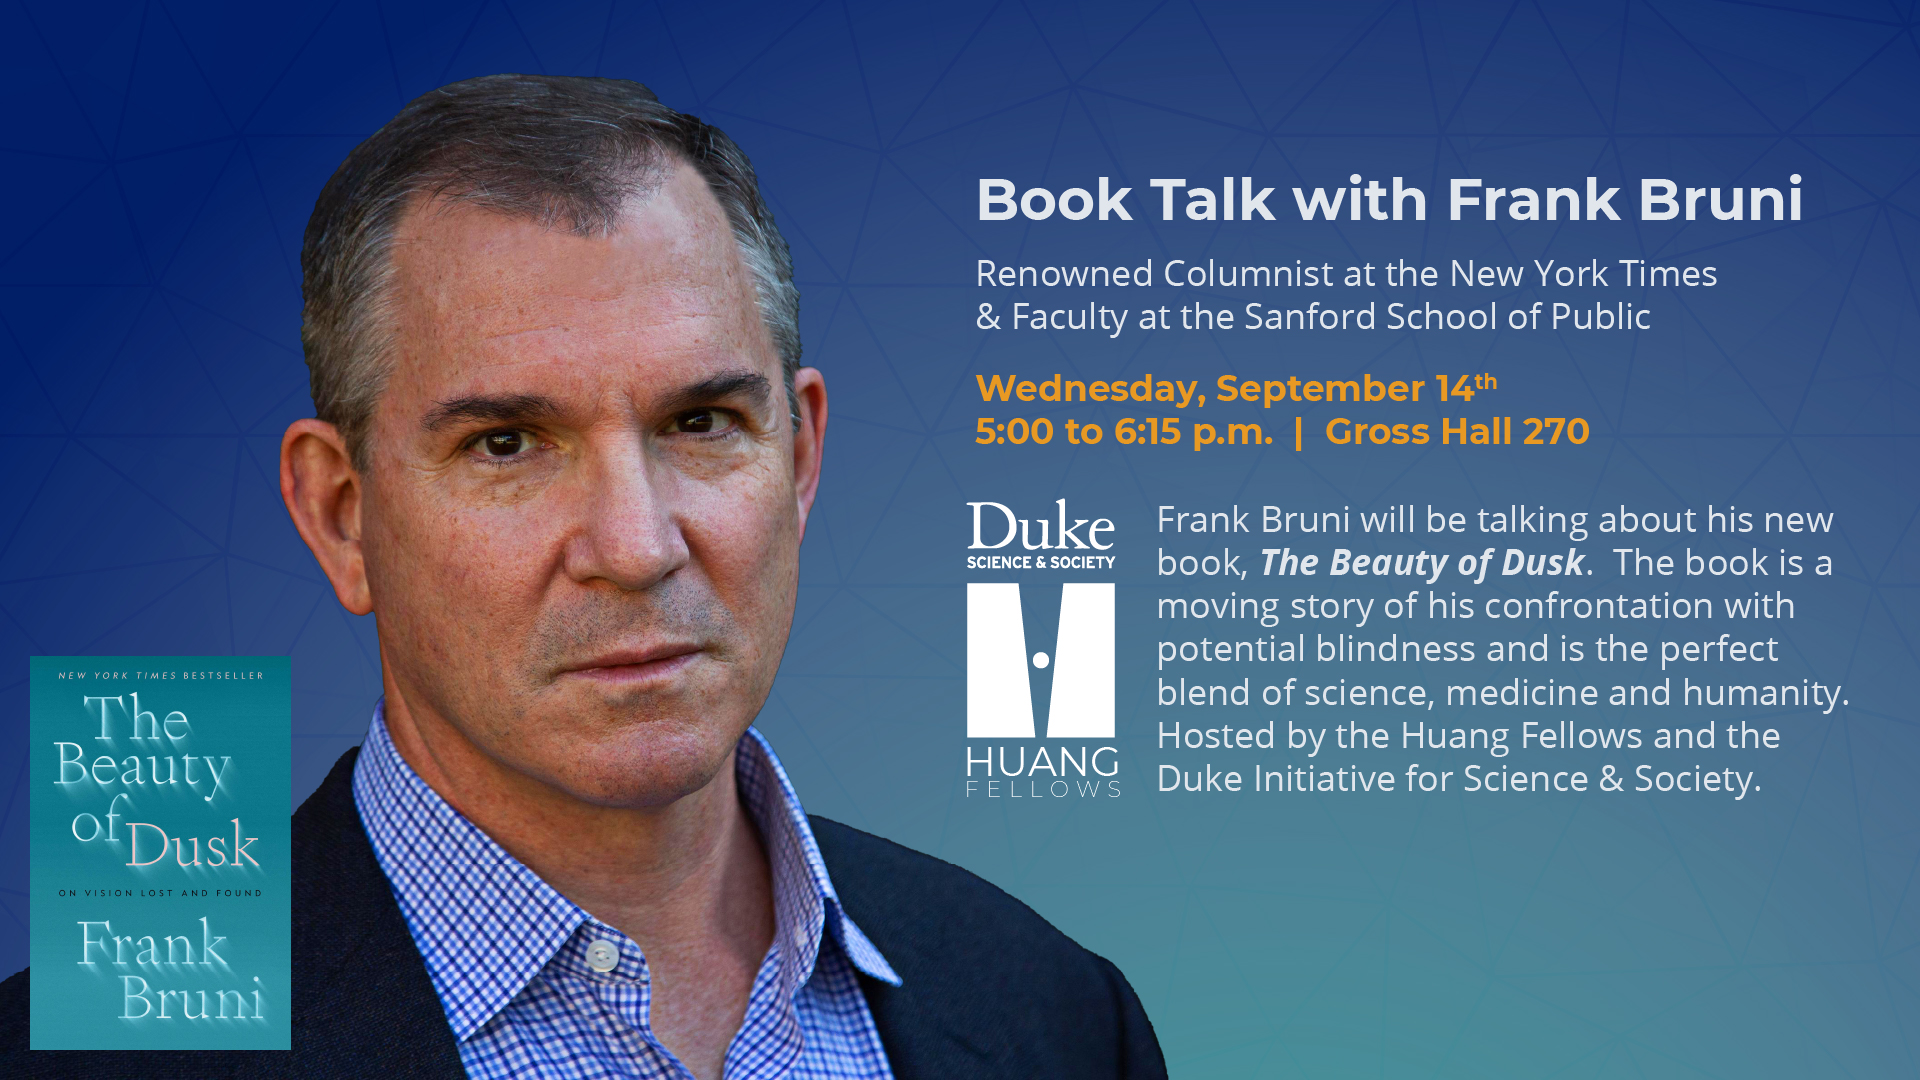 Book Talk with Frank Bruni - Wednesday, 9/14, 5 to 6:15 PM in Gross Hall 270. RSVP by Friday, August 26th